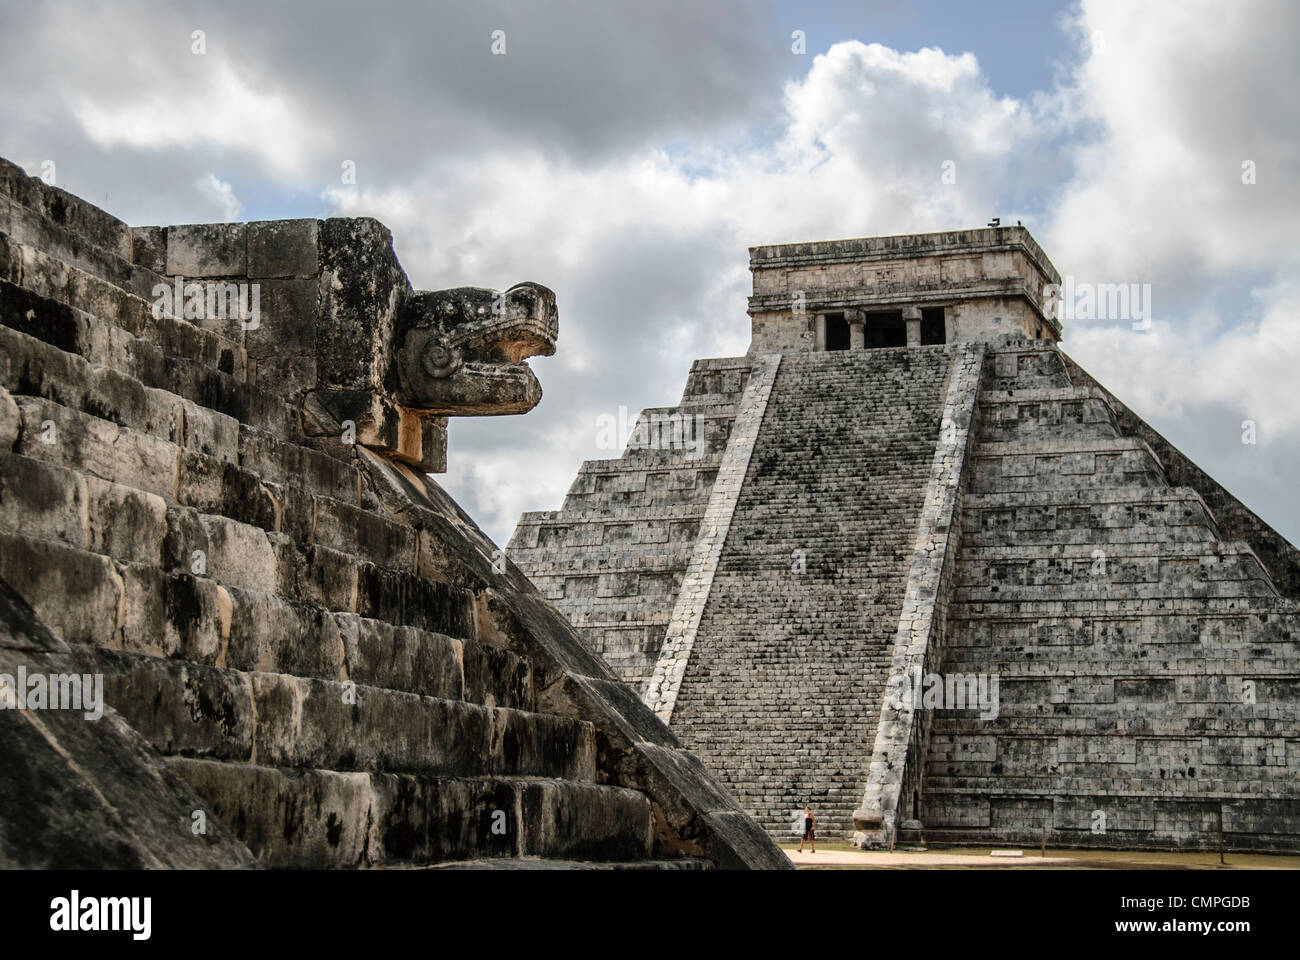 CHICHEN ITZA, Mexico - Temple of Kukulkan (El Castillo) at Chichen Itza Archeological Zone, ruins of a major Maya civilization city in the heart of Mexico's Yucatan Peninsula. At left, the building is known as the Venus Platform. Stock Photo